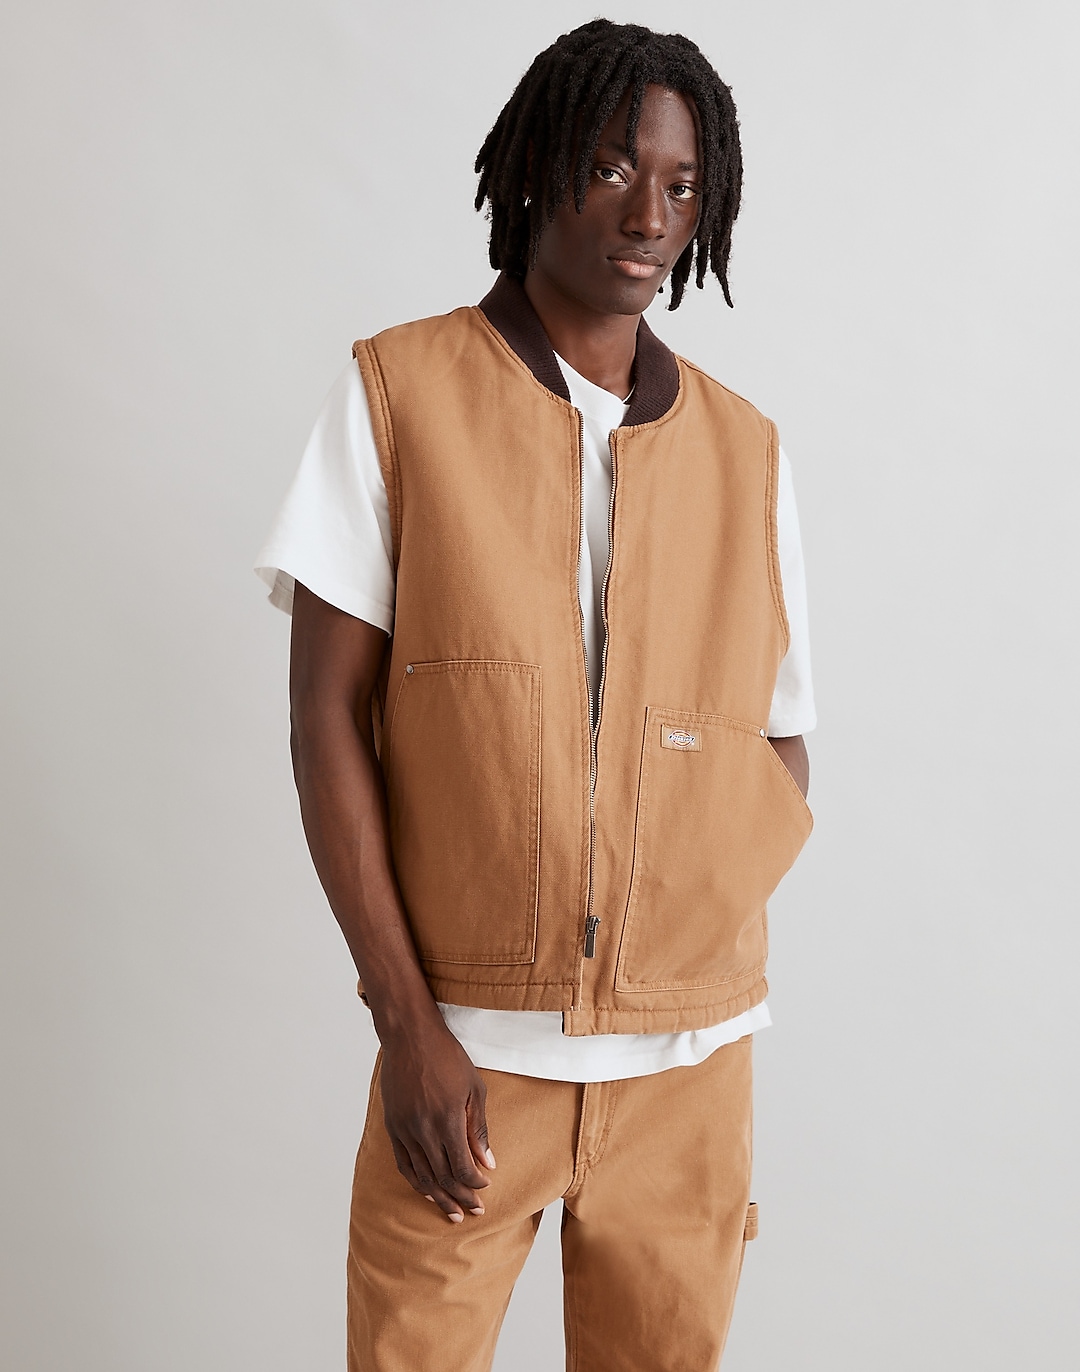 Dickies® Stonewashed Duck High Pile Fleece-Lined Vest